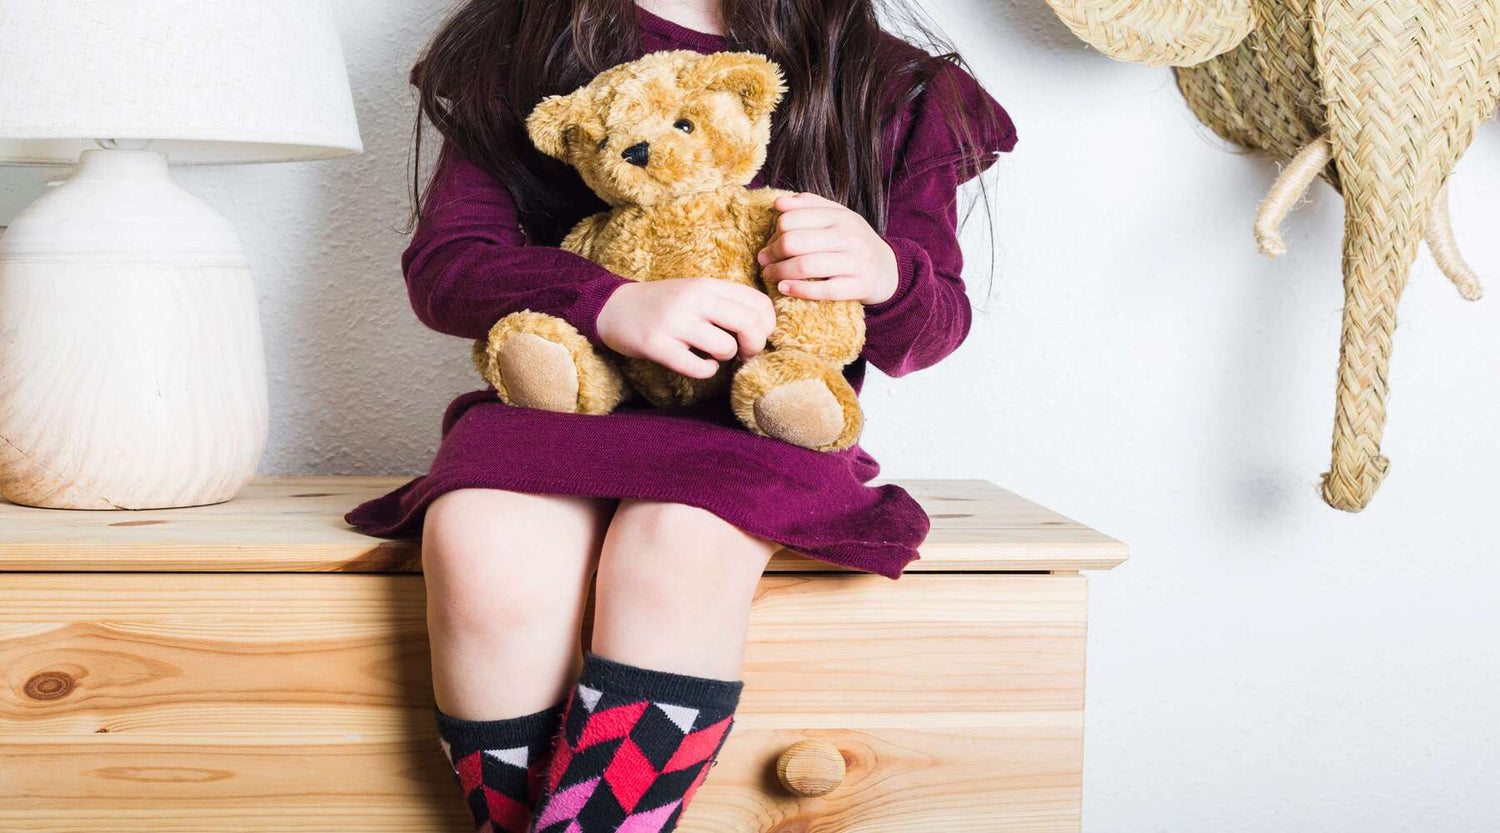 How to Print DIY Teddy Bear Clothes Sewing Pattern at Home?